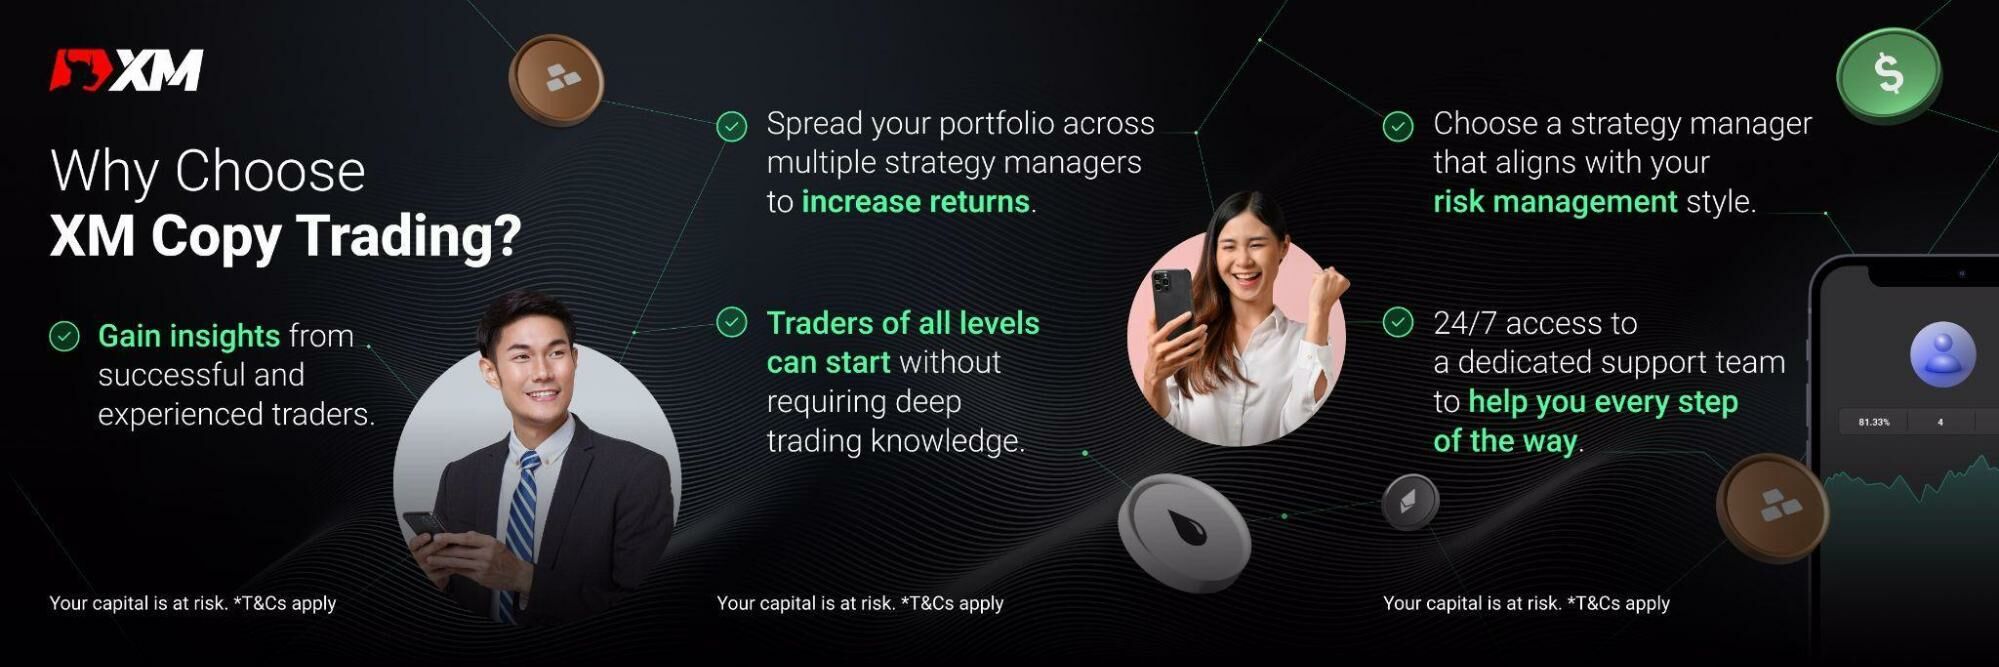 Infographic showing the reasons to choose XM Copy Trading